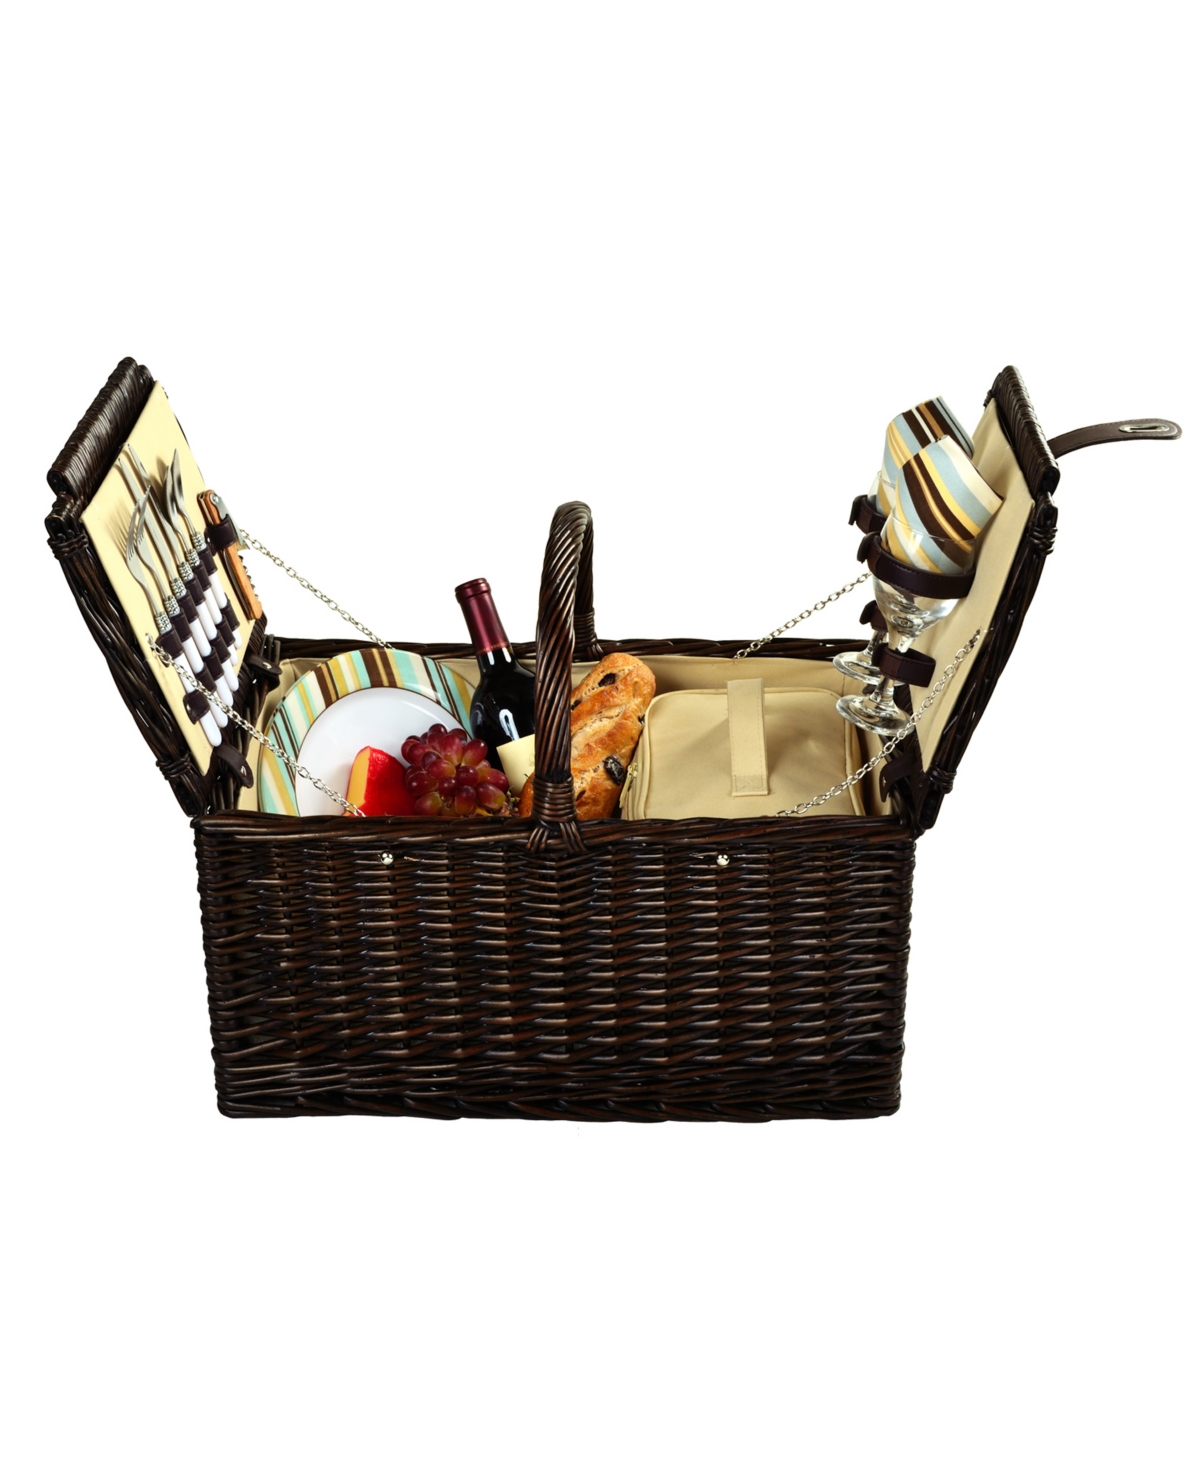 Surrey Willow Picnic Basket with Service for 2 - Orange